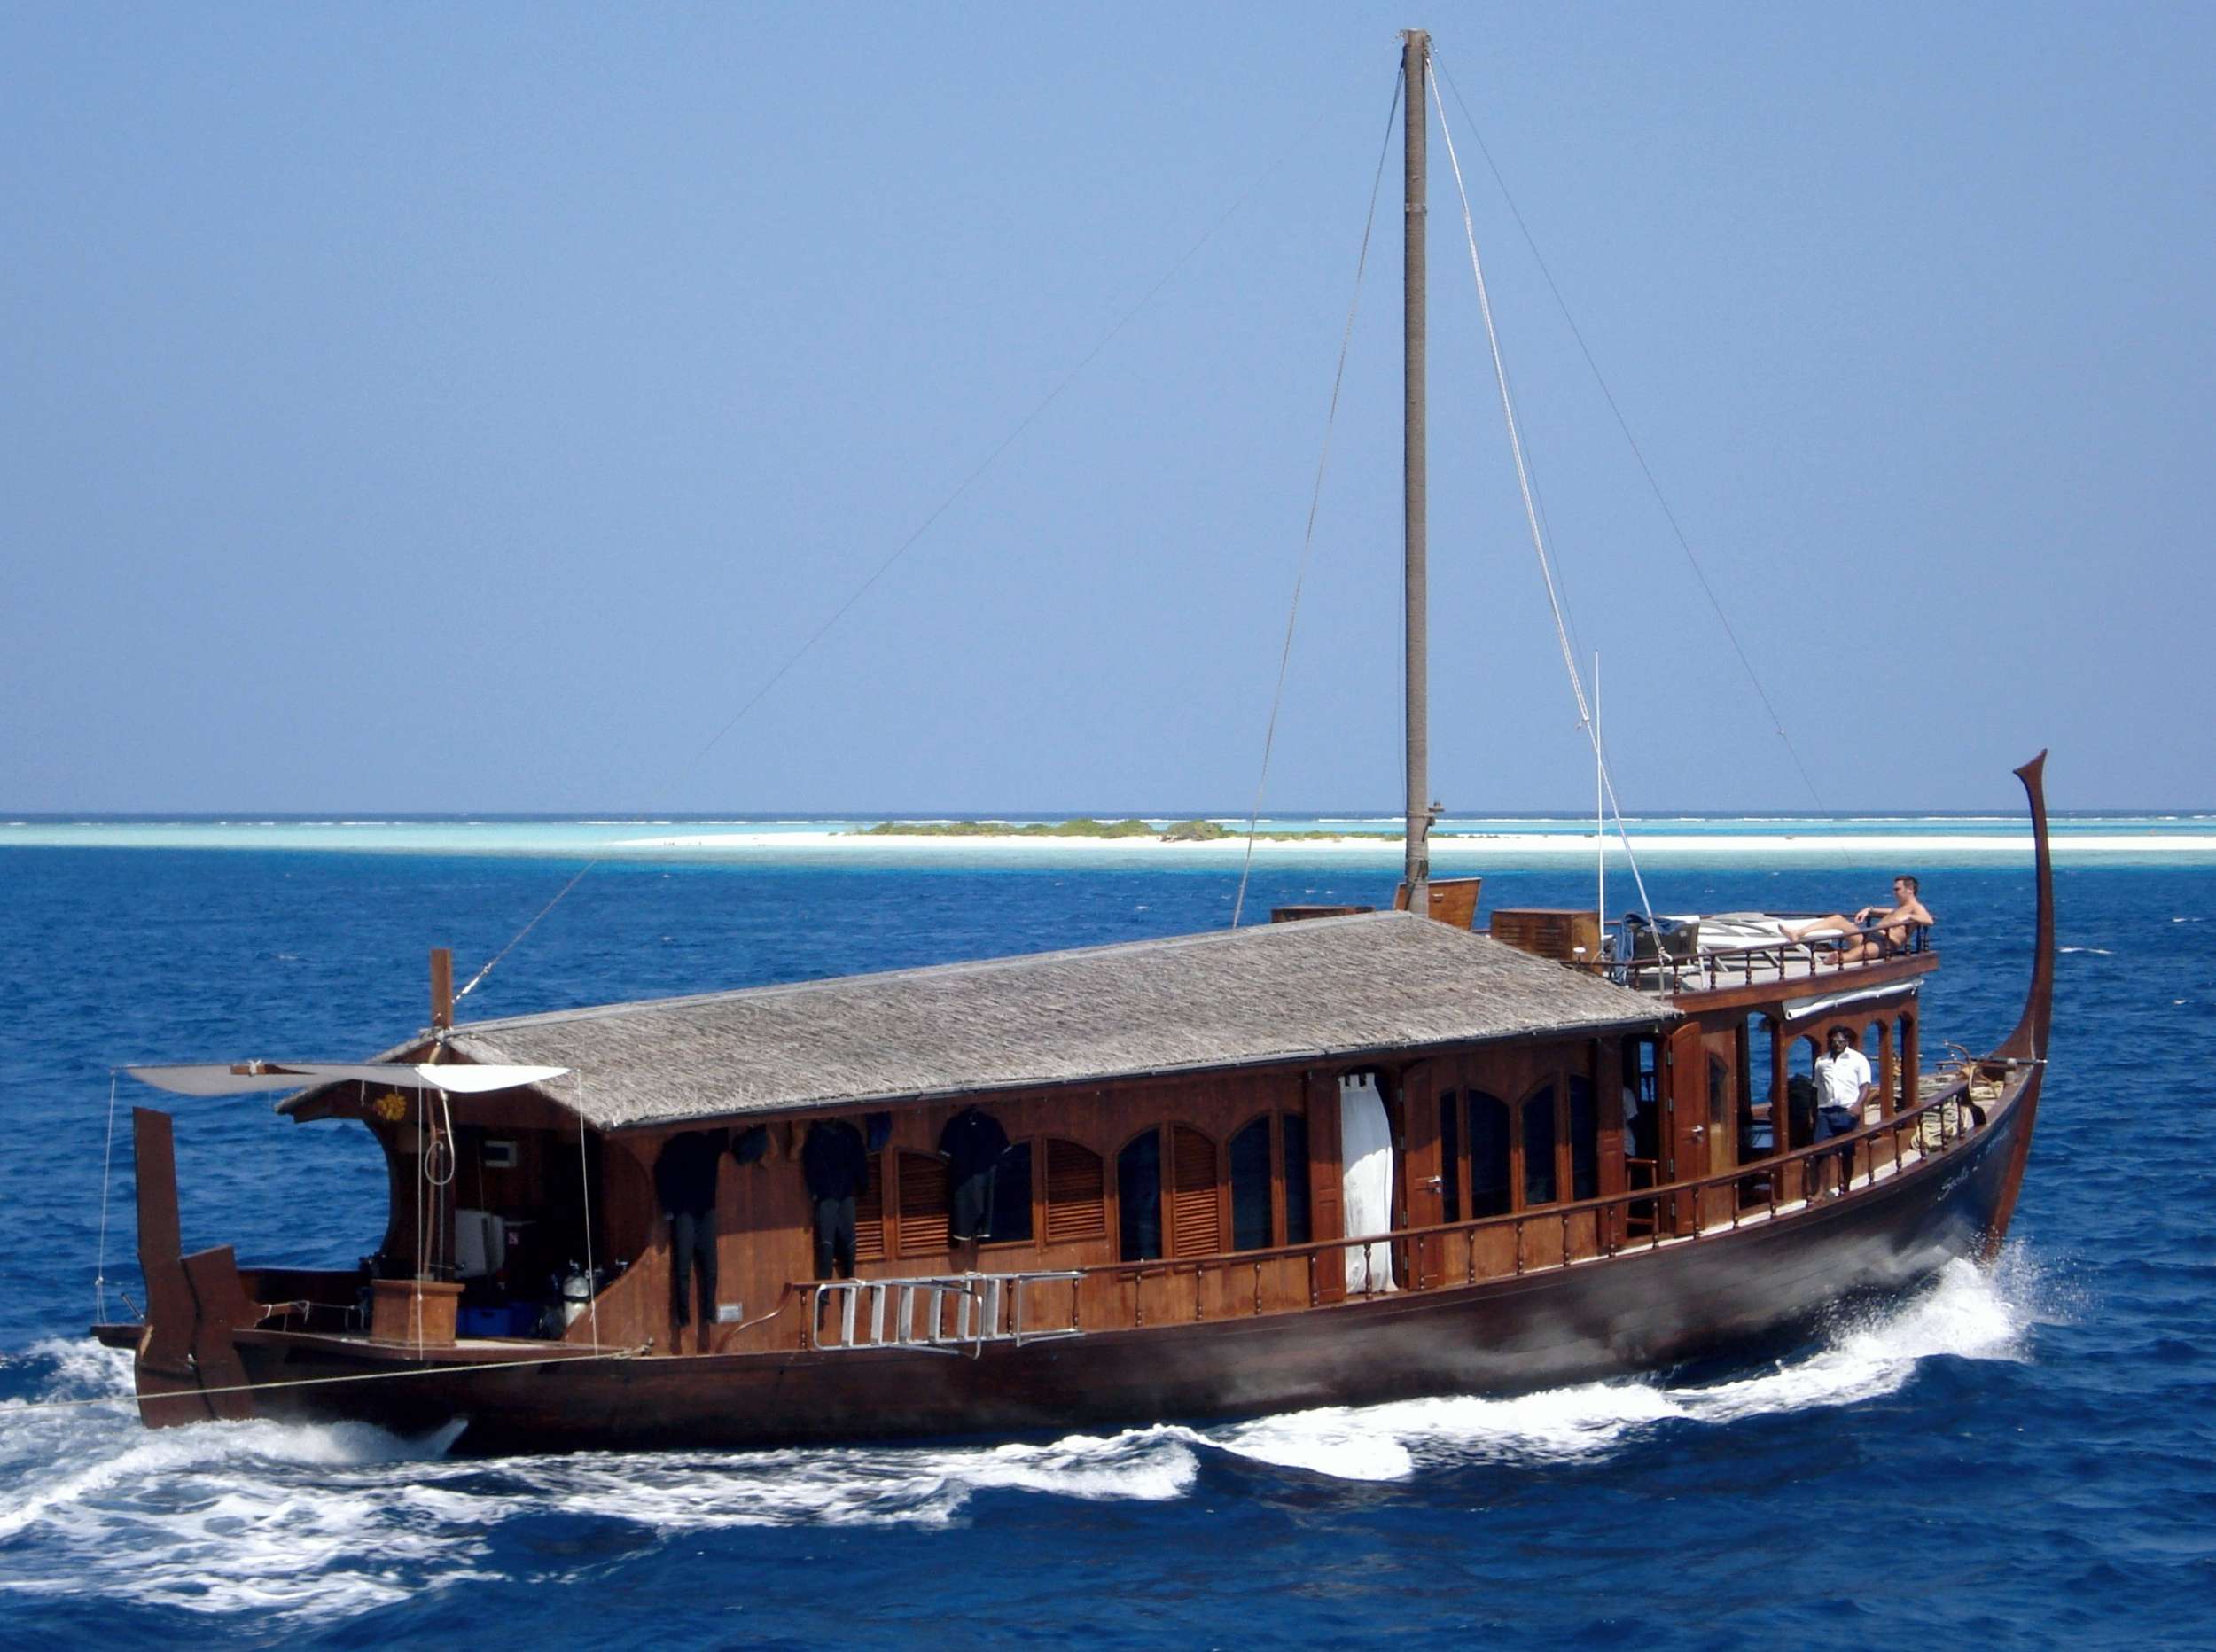 DHONI STELLA 2 - Yacht Charter Philippines & Boat hire in Indian Ocean & SE Asia 1